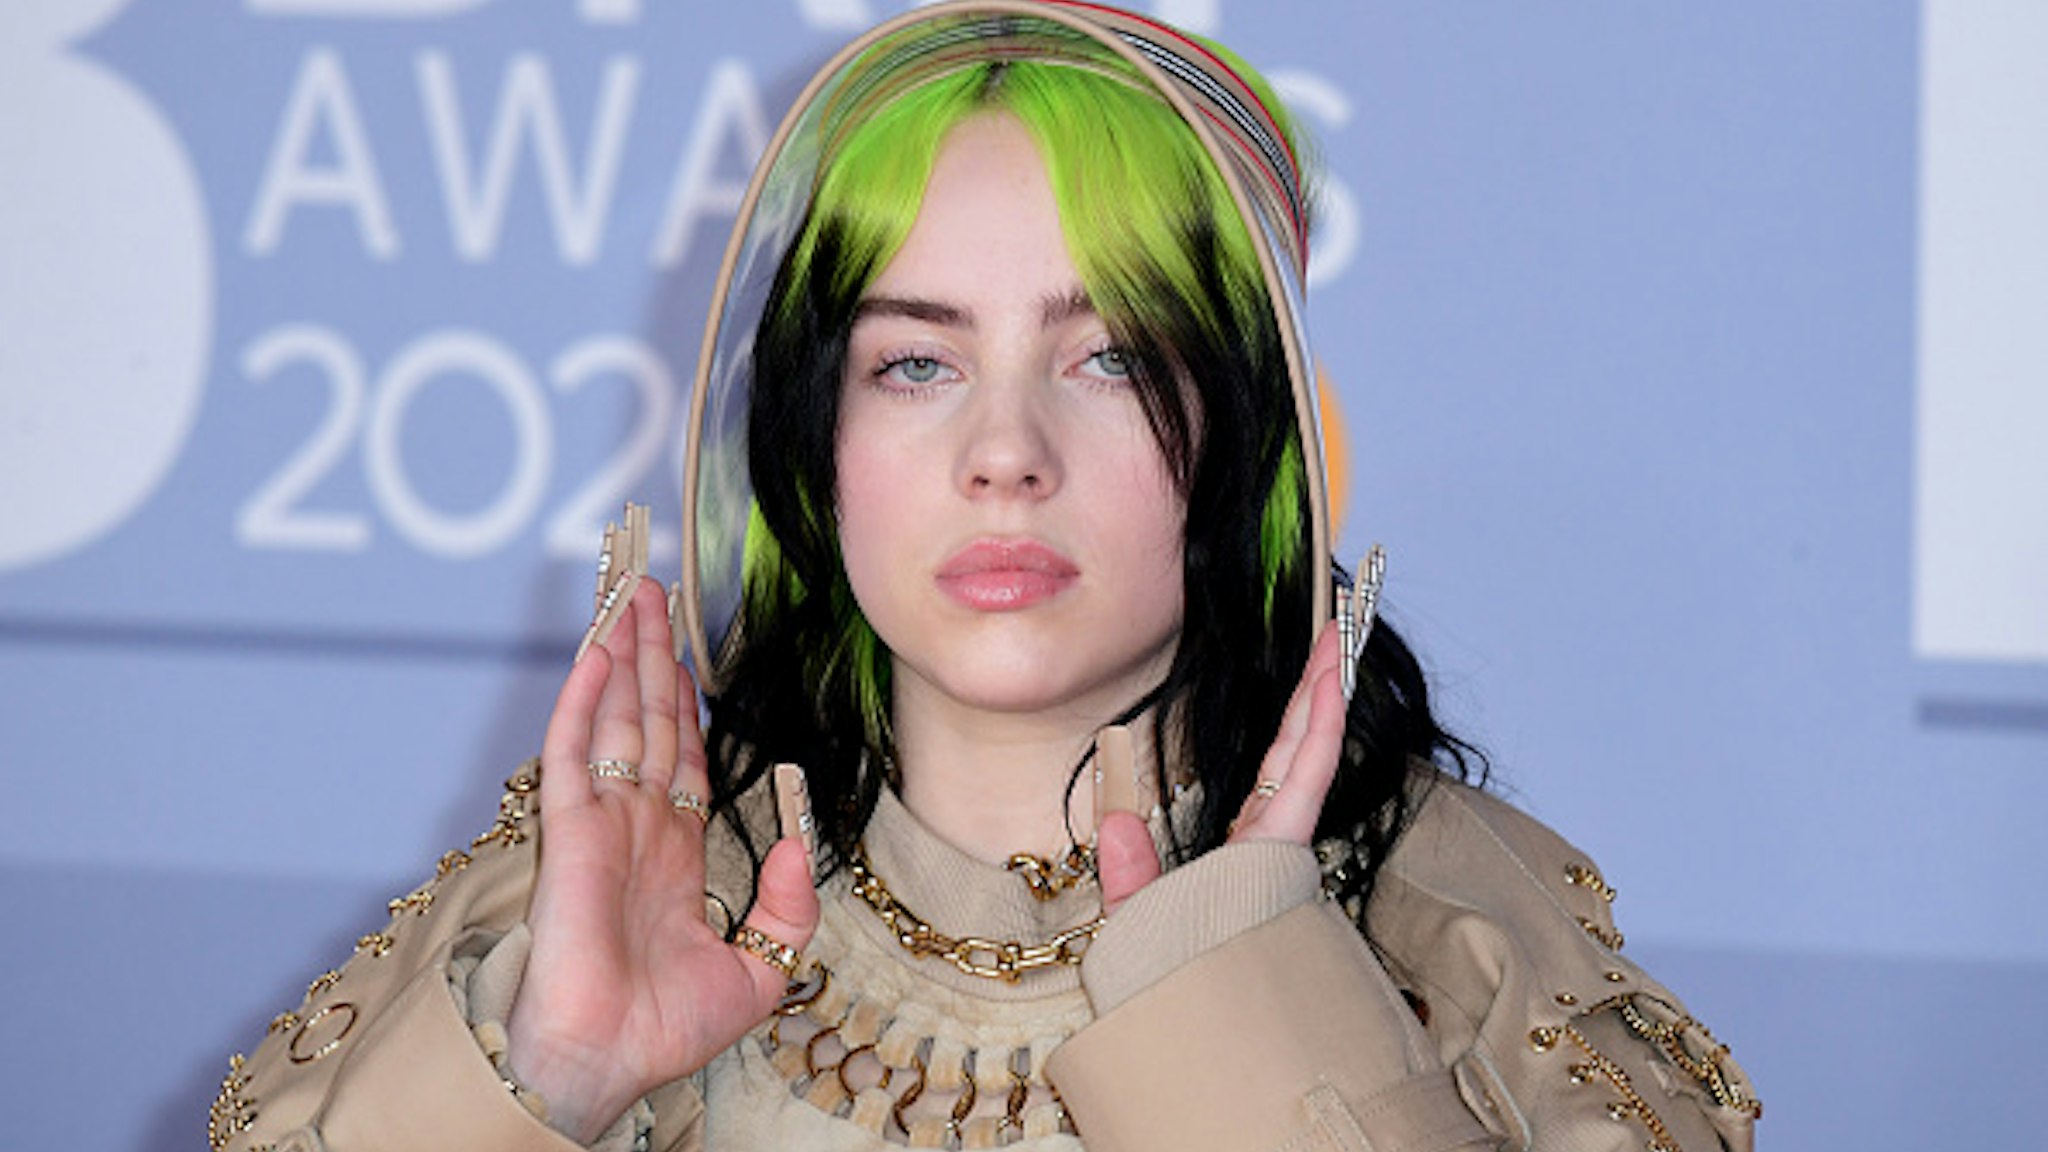 Billie Eilish arriving at the Brit Awards 2020 held at the O2 Arena, London.